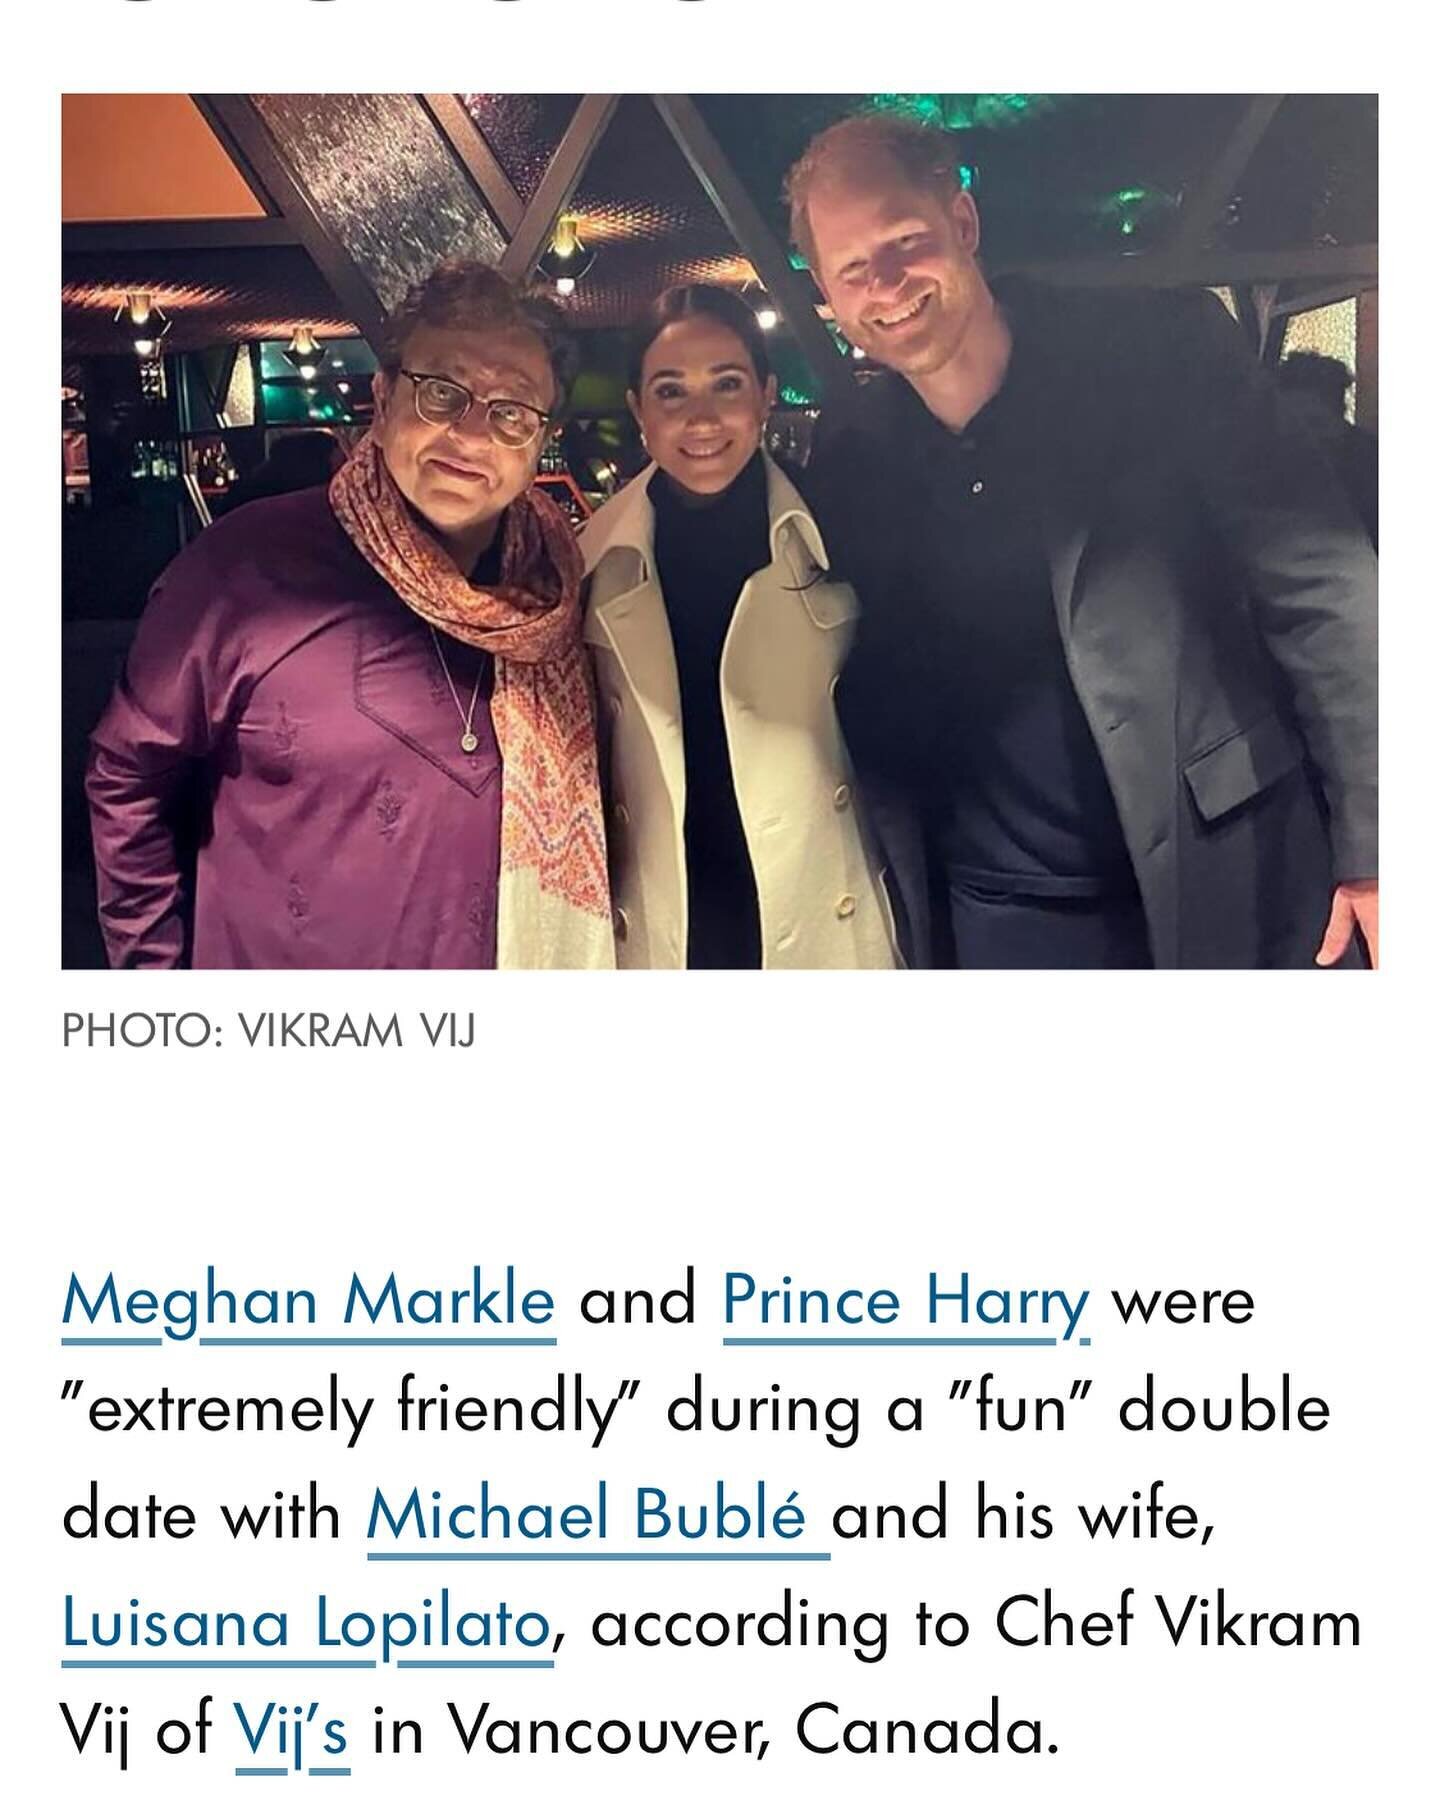 Just came across this article 🤯😱 seems our collab gin with @eatdrinkvijs is Royal approved 🤩

Gotta admit, this made our day 🥰

#royals #bubl&eacute; #famous #mixologist #happyhour #spirits #tonic #ginspiration #liquor #ginlove #gincocktails #ins